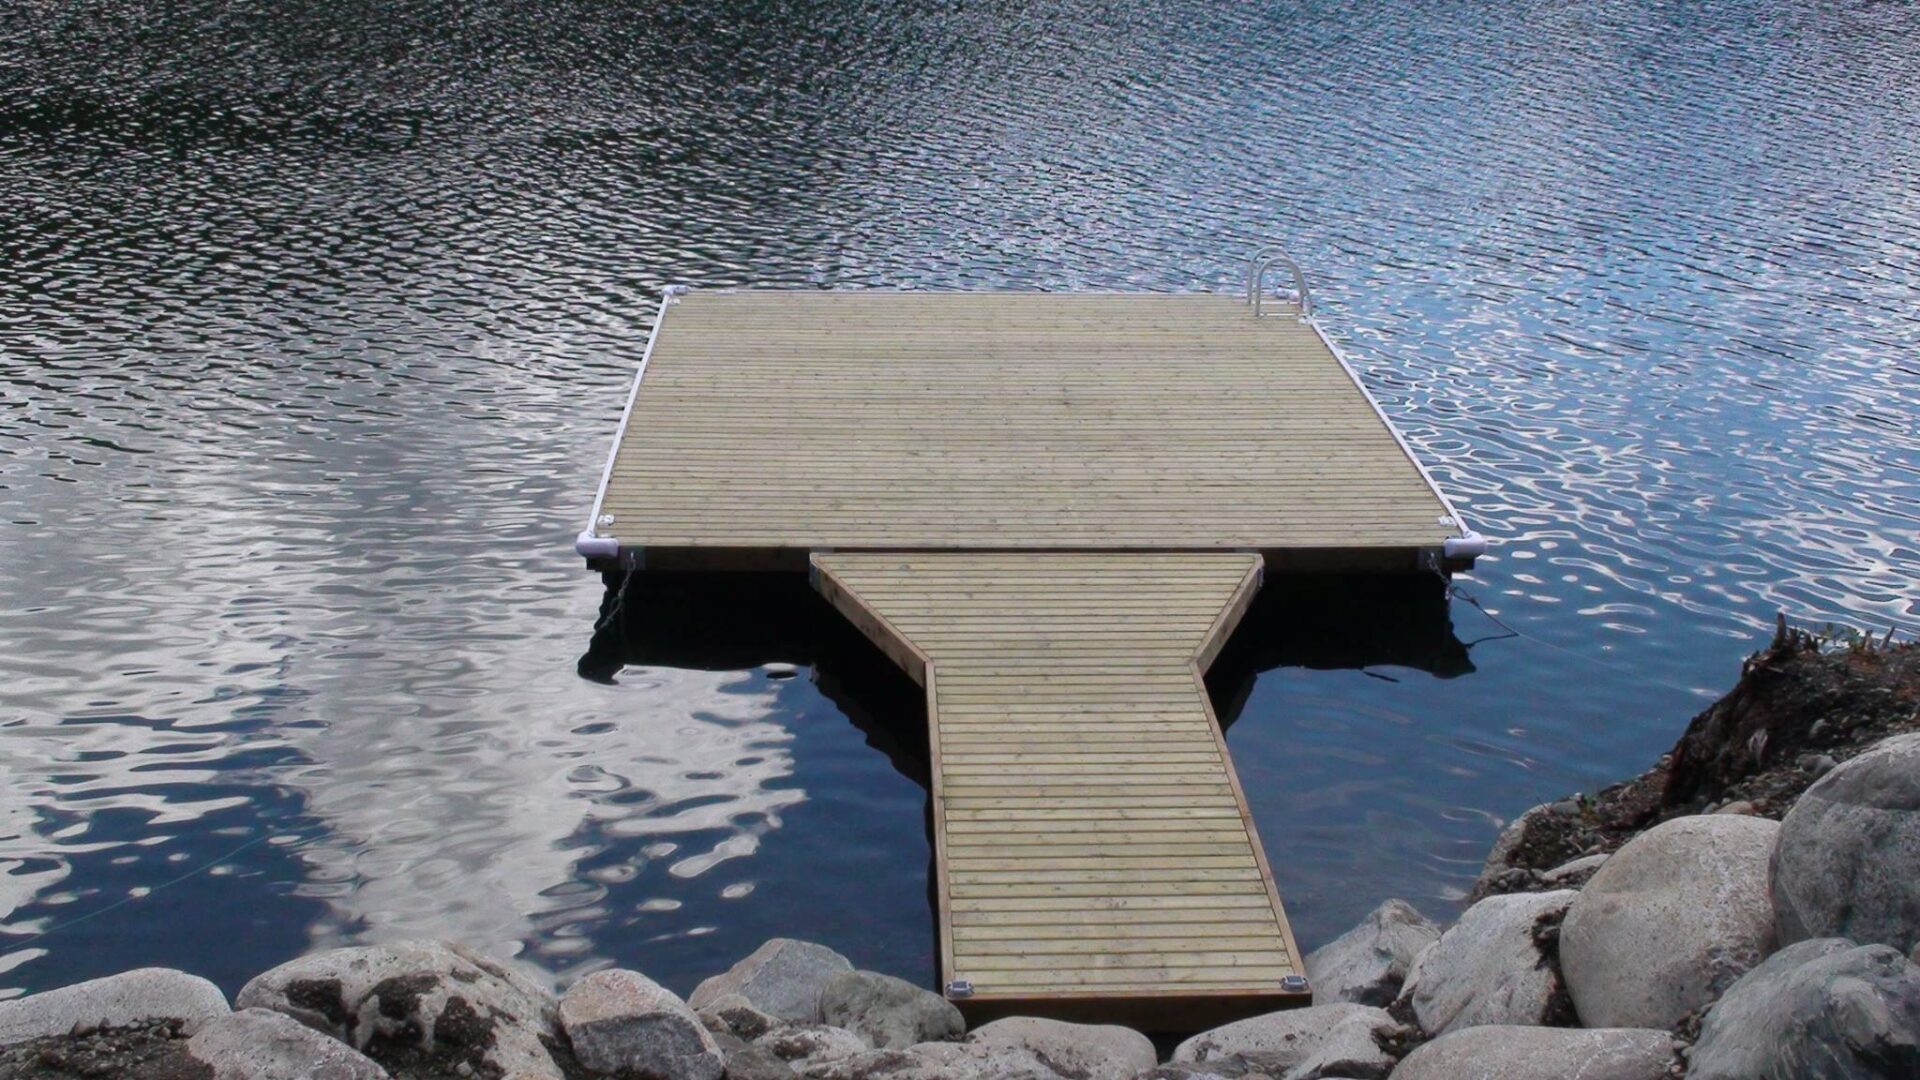 A wooden dock extending into a body of water